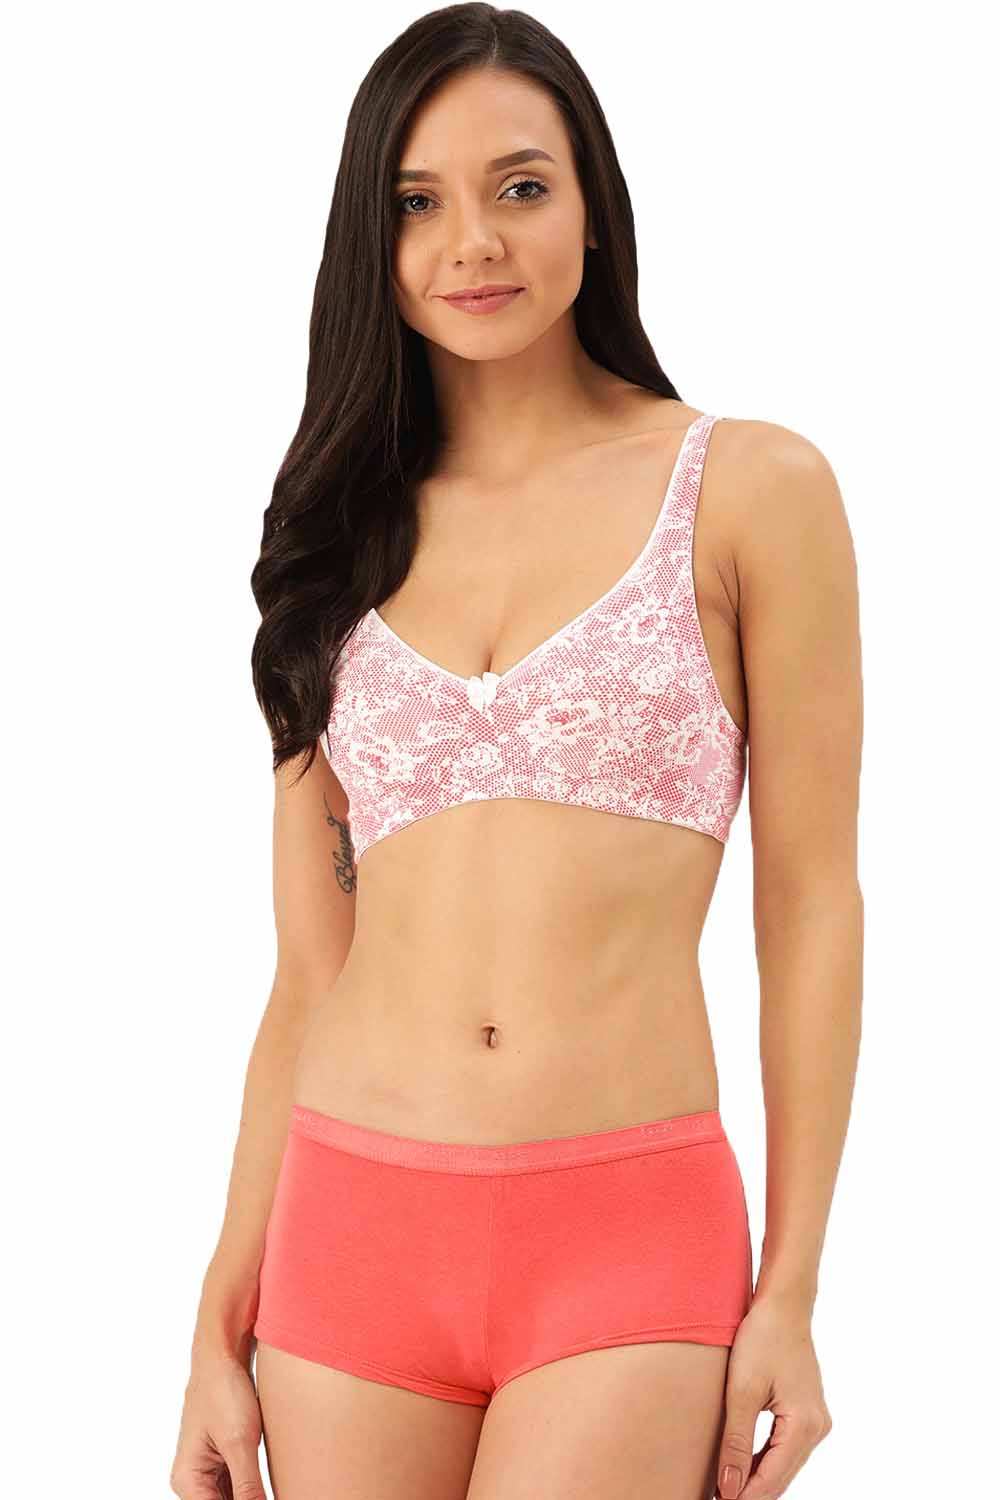 Padded Printed Cotton Seamless Bra Panty Set for Daily Wear, Size